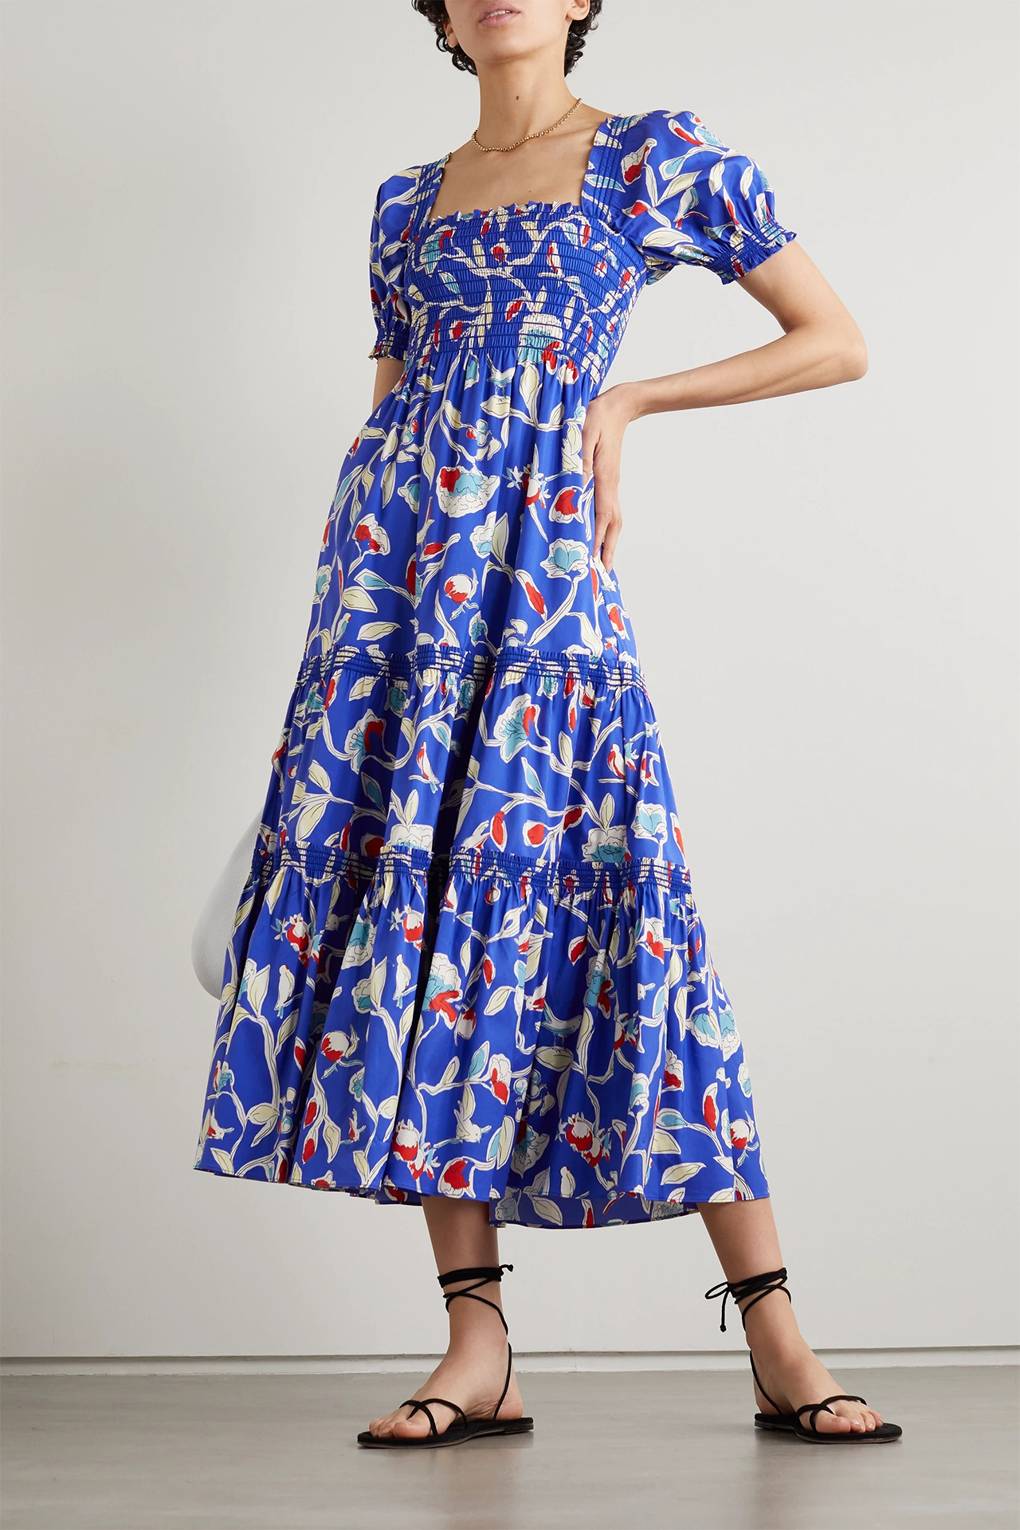 Milkmaid Dresses: The Shape That Is Flattering On Every Body | Glamour UK